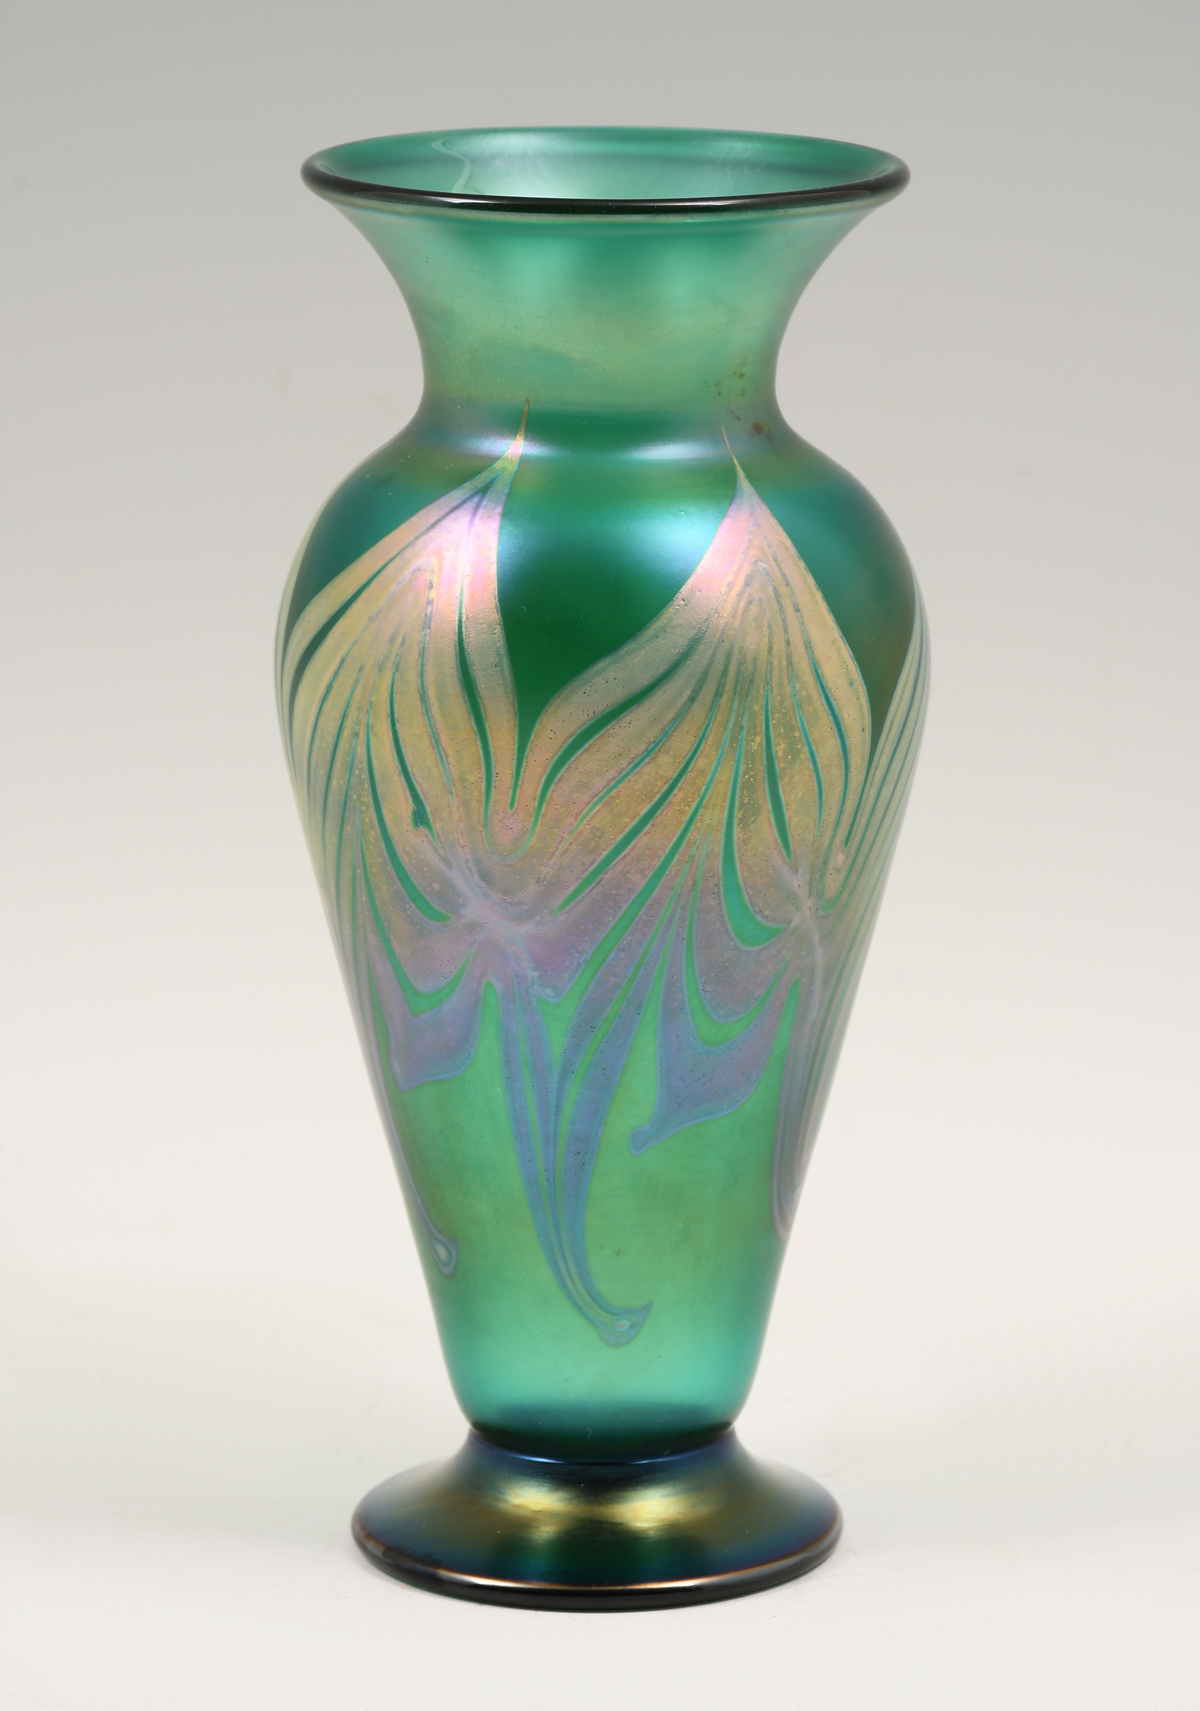 DURAND SIGNED ART GLASS VASE Green 36a26c